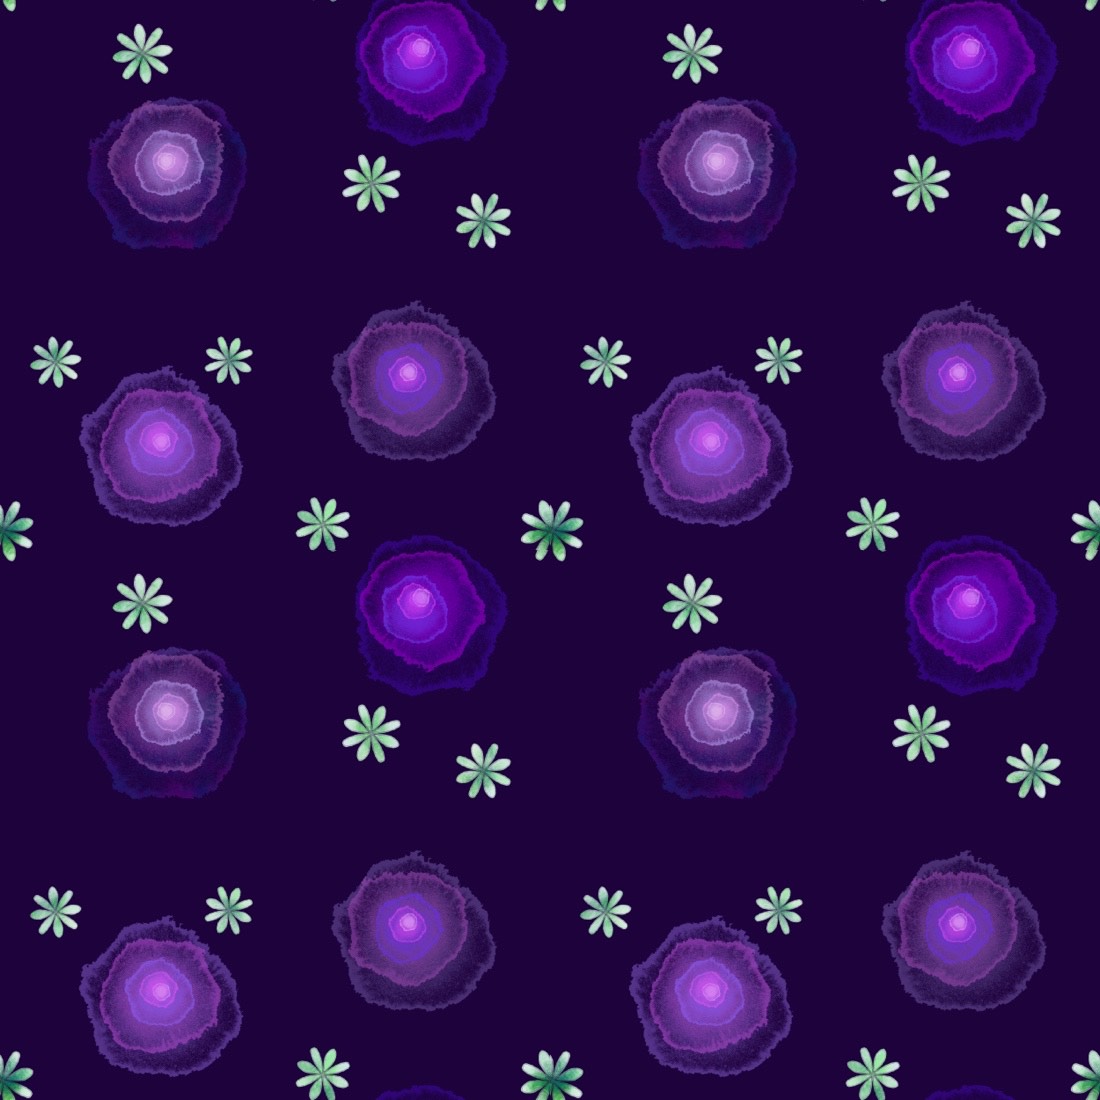 Jellyfish flowers pattern cover image.